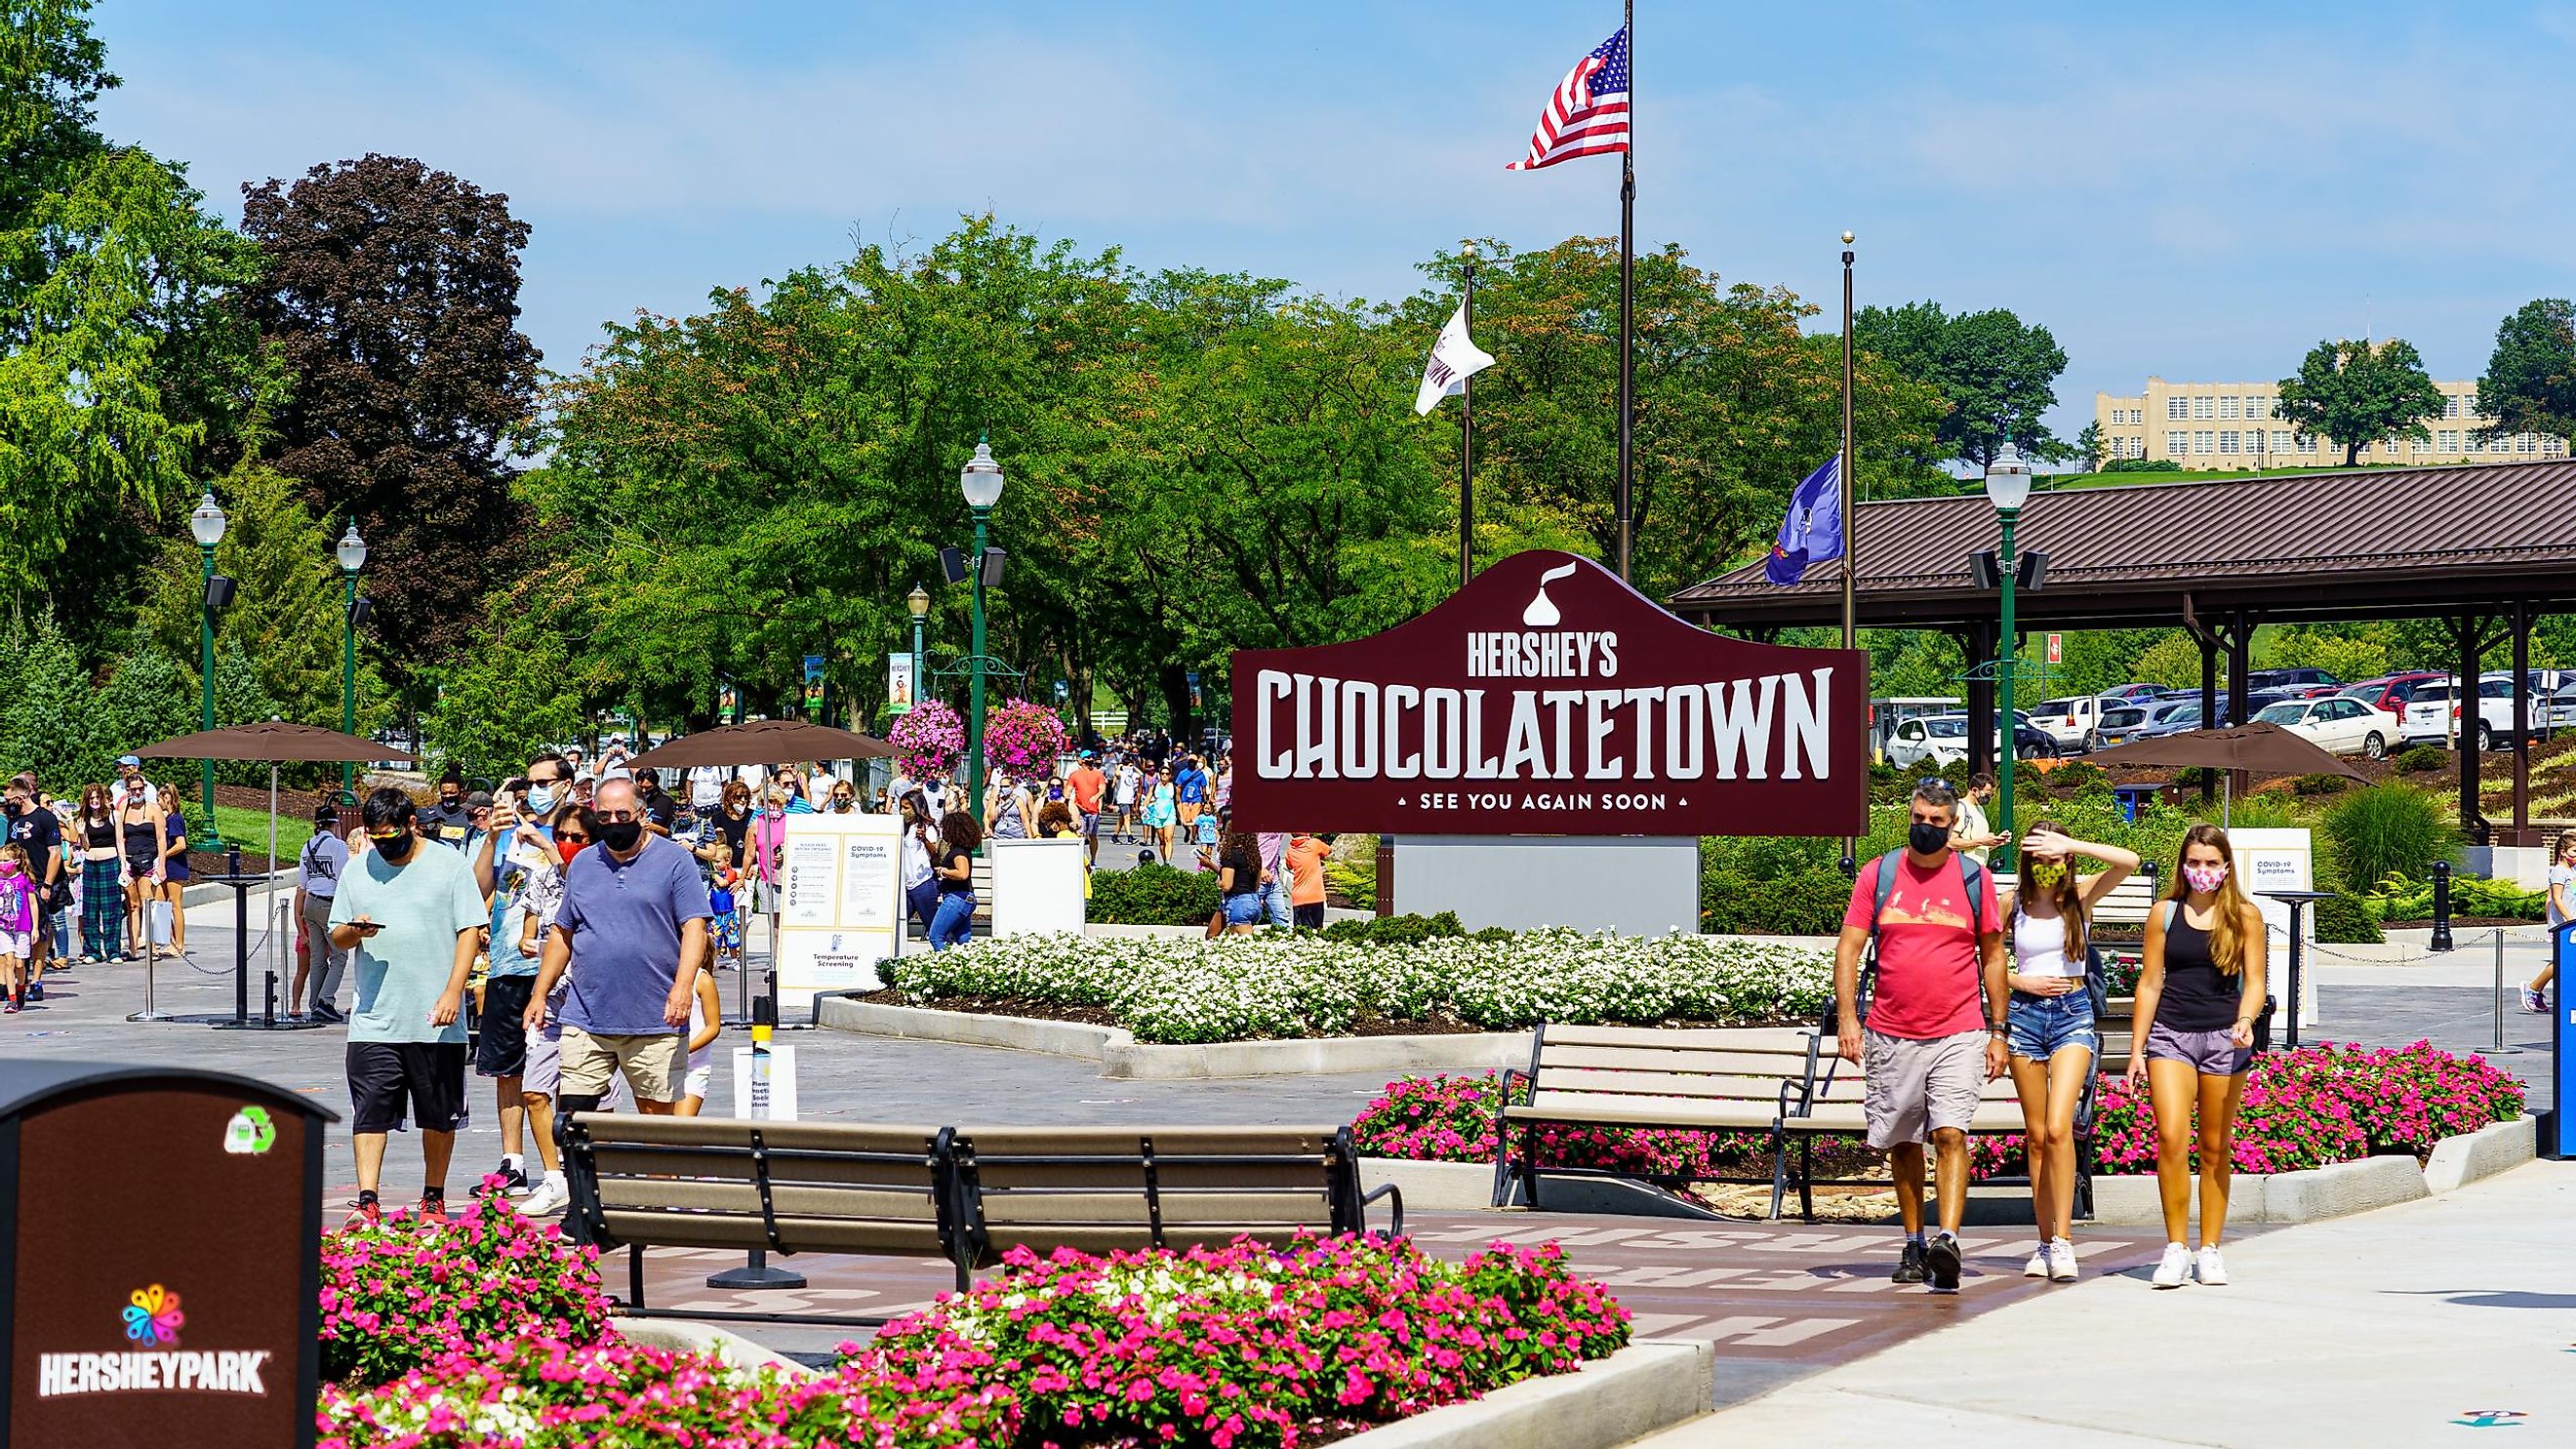 Visitors arriving at the entrance of Hersheypark, a popular attraction in Chocolatetown USA.